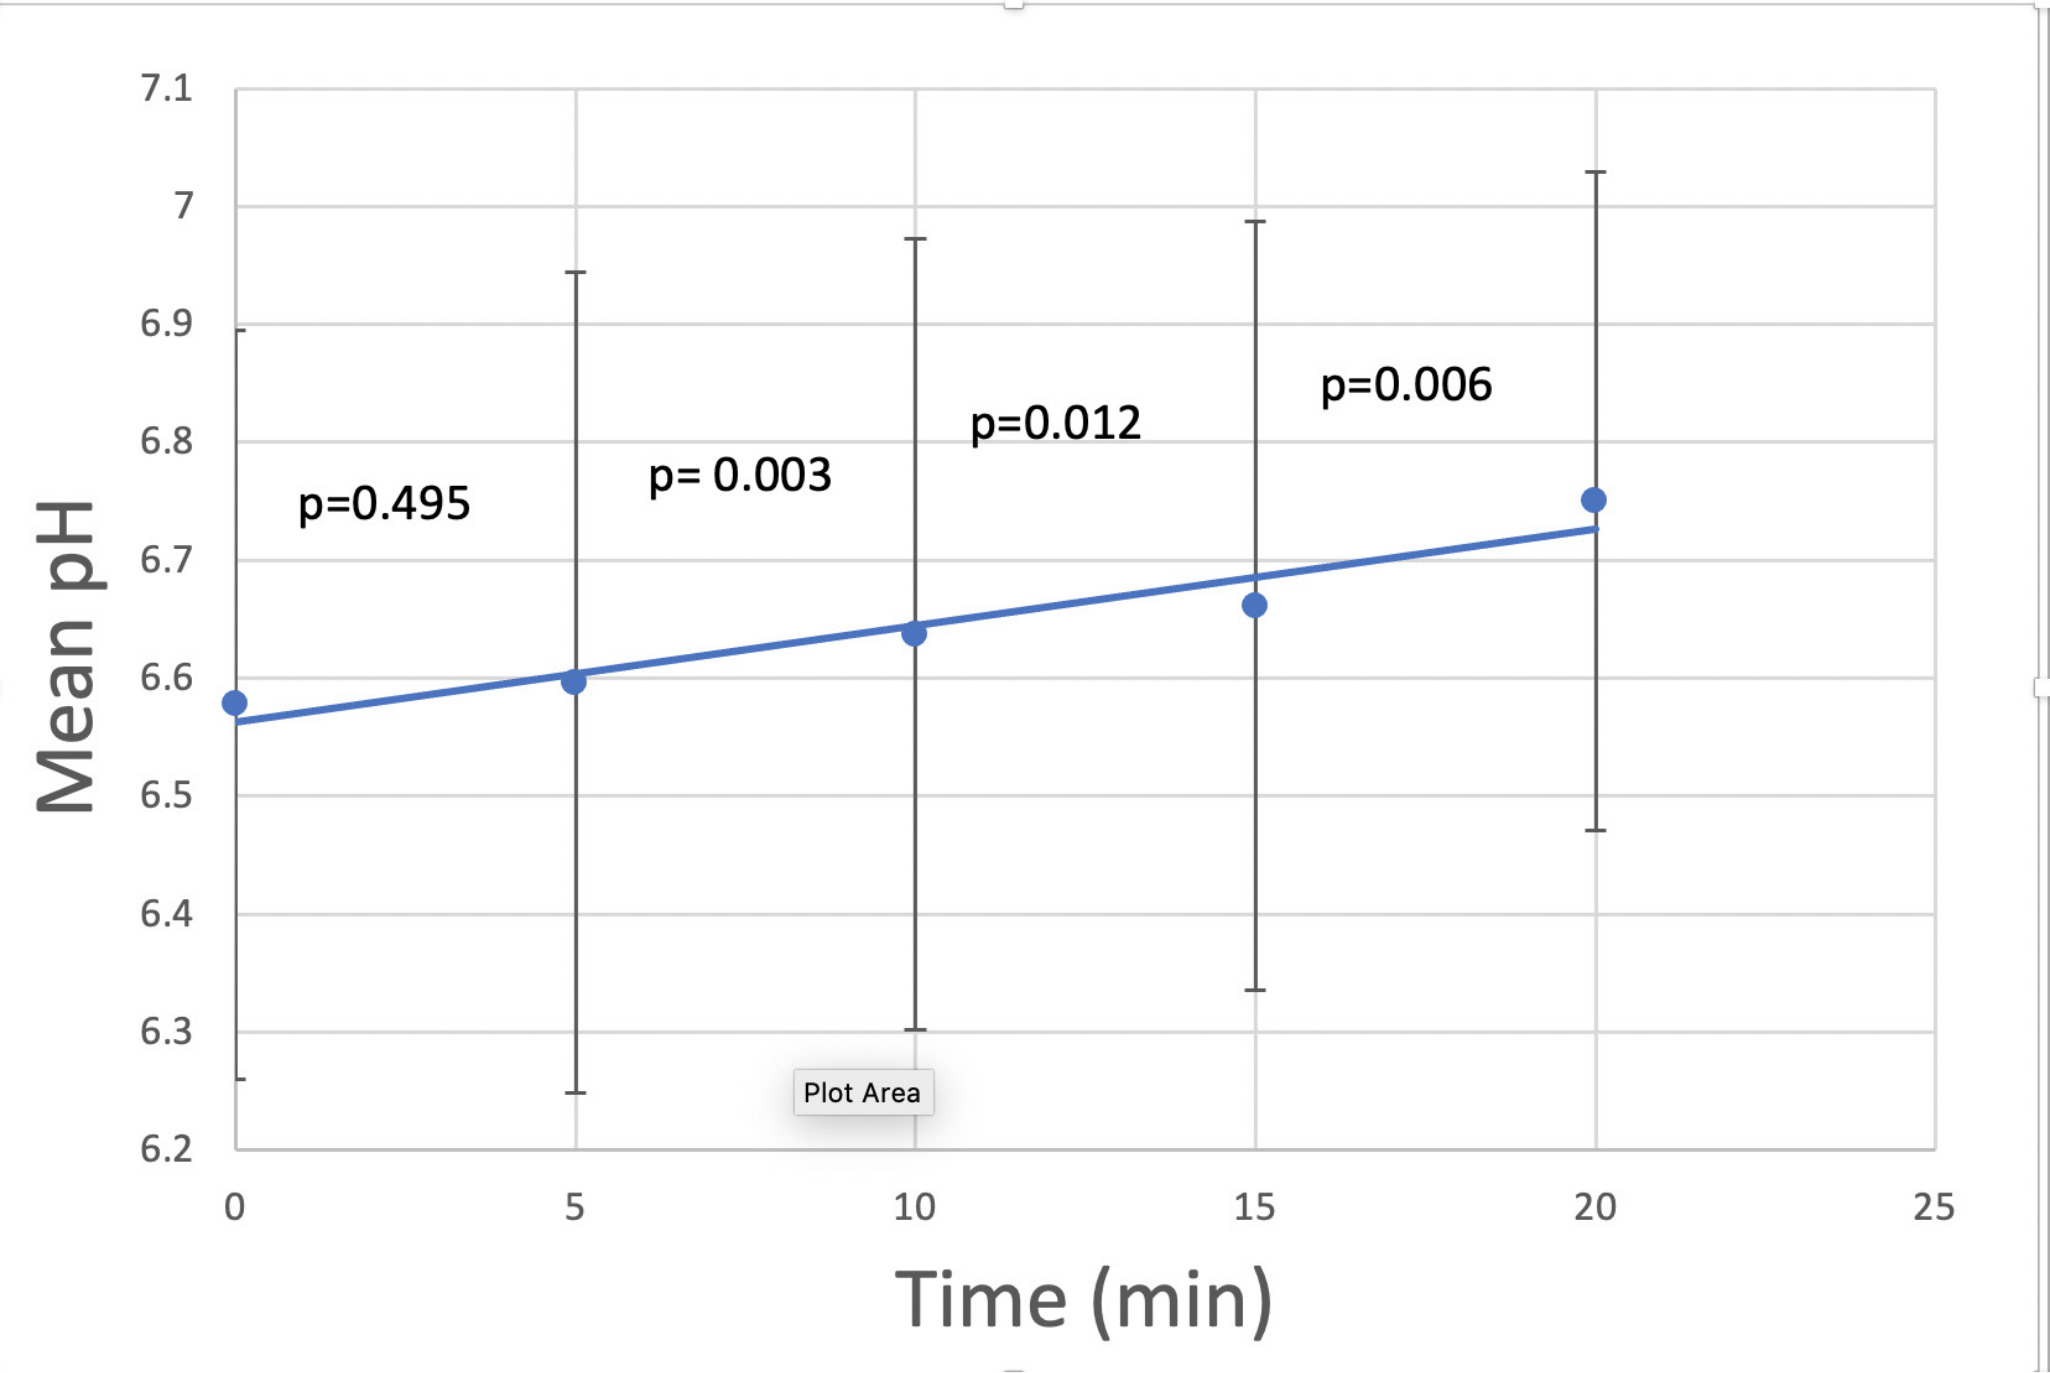 Fig. 2 
          Intramuscular pH changes following release of the tourniquet.The p-values demonstrate significance of difference in pH recovery between each five-minute interval (Wilcoxon ranked pairs test): 0 to 5 mins, p = 0.495; 5 to 10 mins, p = 0.003; 10 to 15 mins, p = 0.0120; 15 to 20 mins, p = 0.006.
        